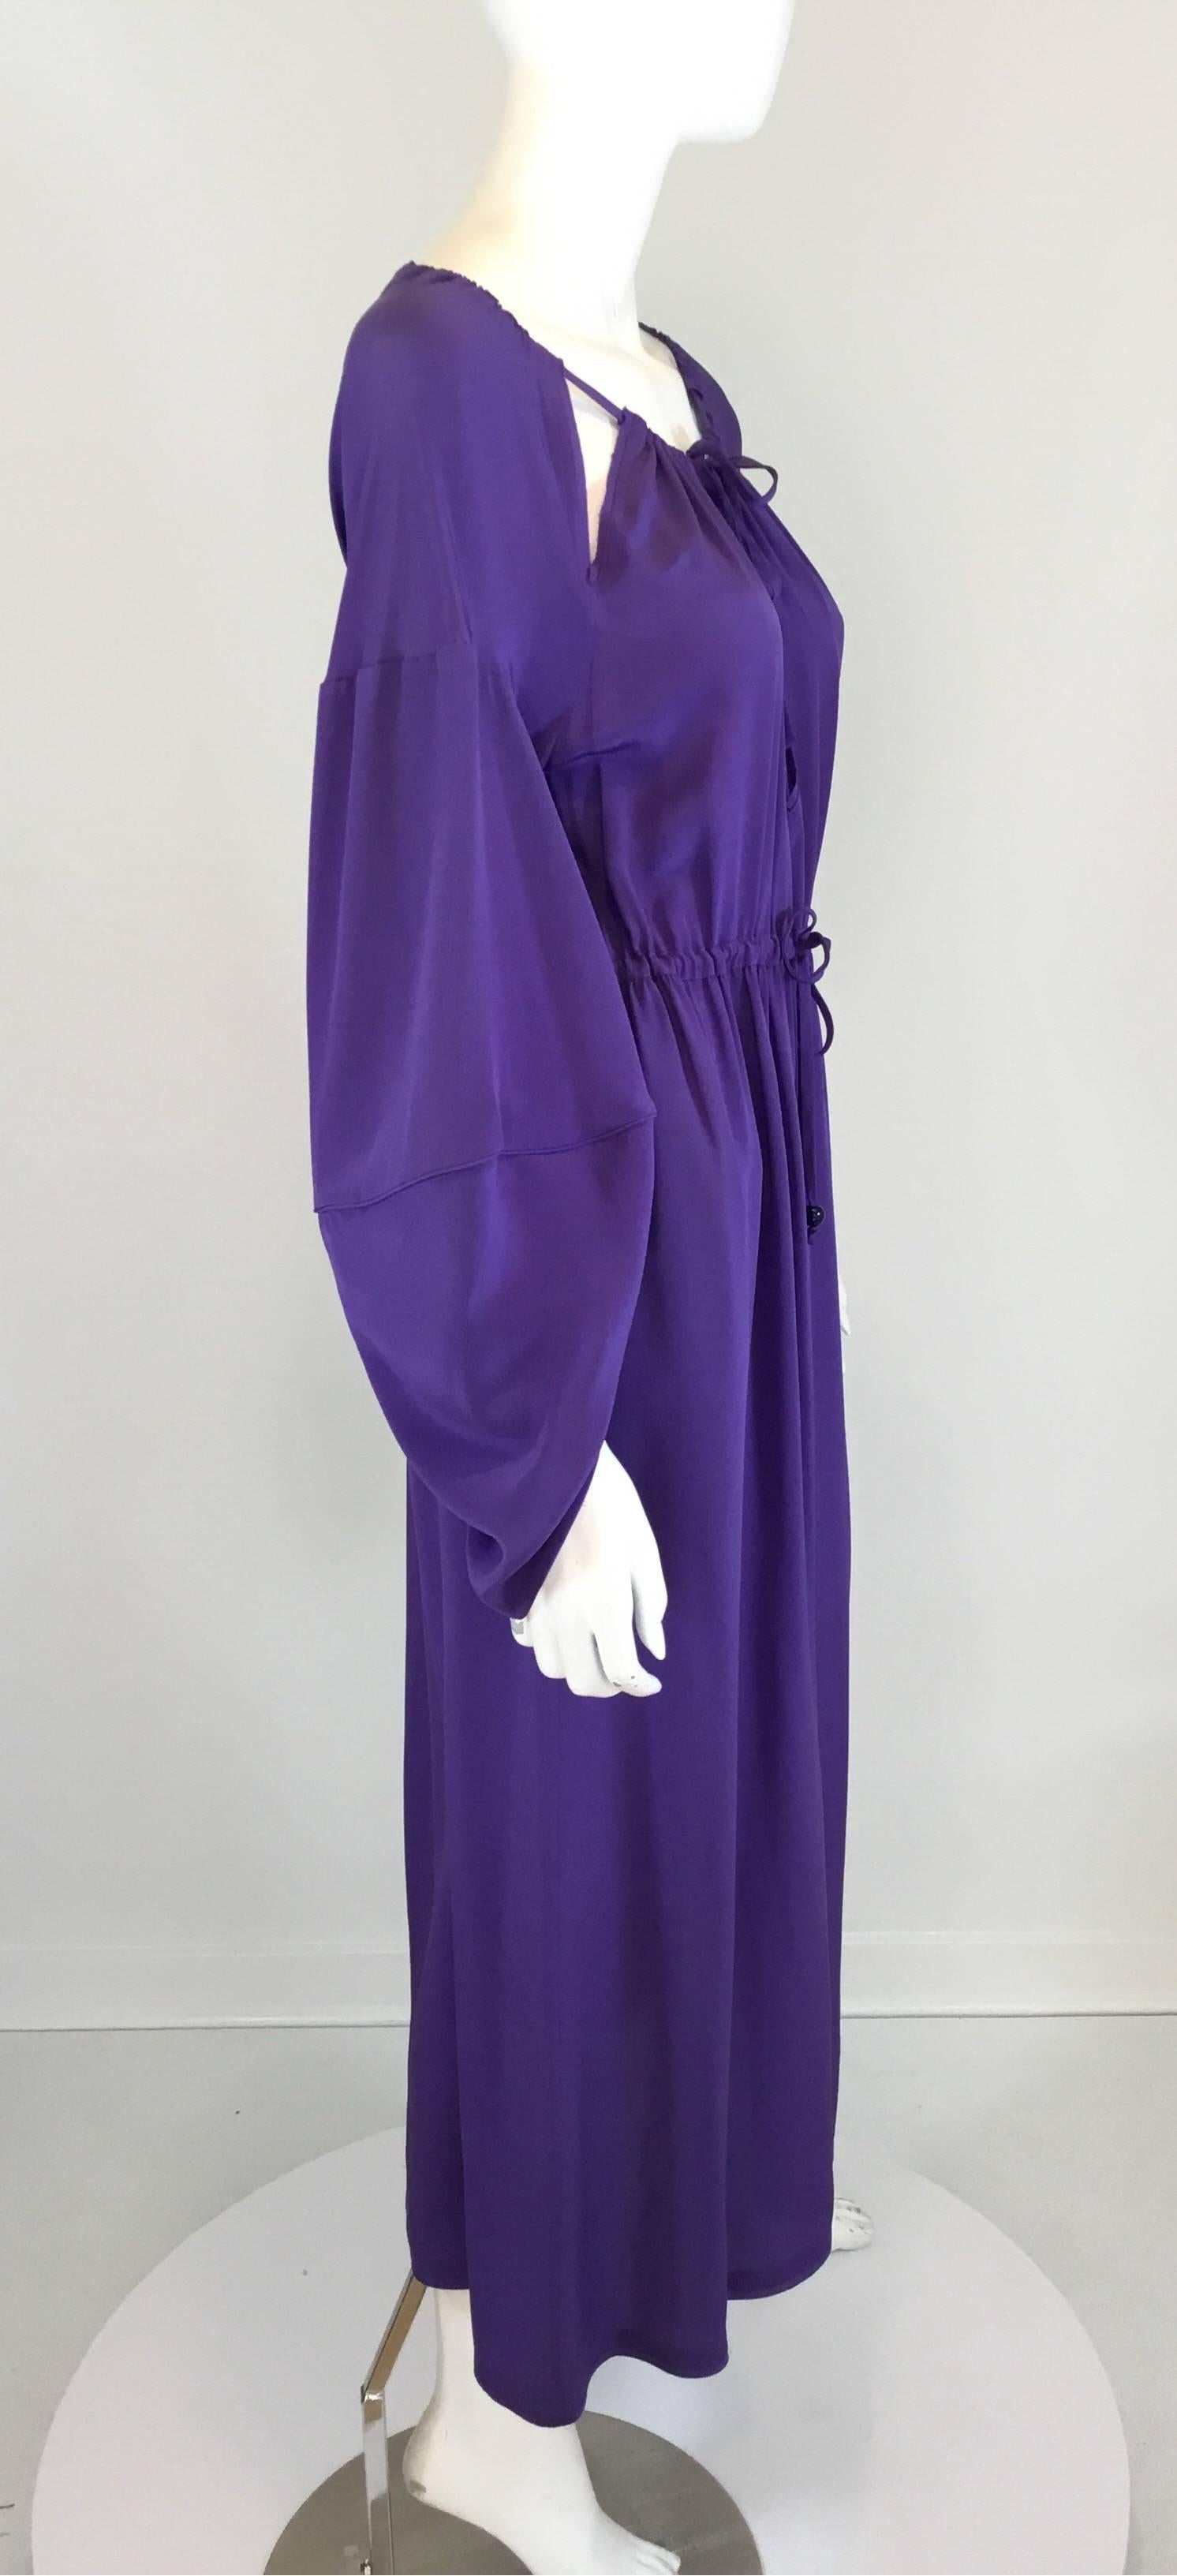 Fendi midi dress featured in purple and of 100% silk with a keyhole neckline detail, silk string tie closure at the neck waist, and butterfly sleeves. Dress is labeled a size 38, made in Italy.

bust 40'', waist 36'', hips 46'', length (center to